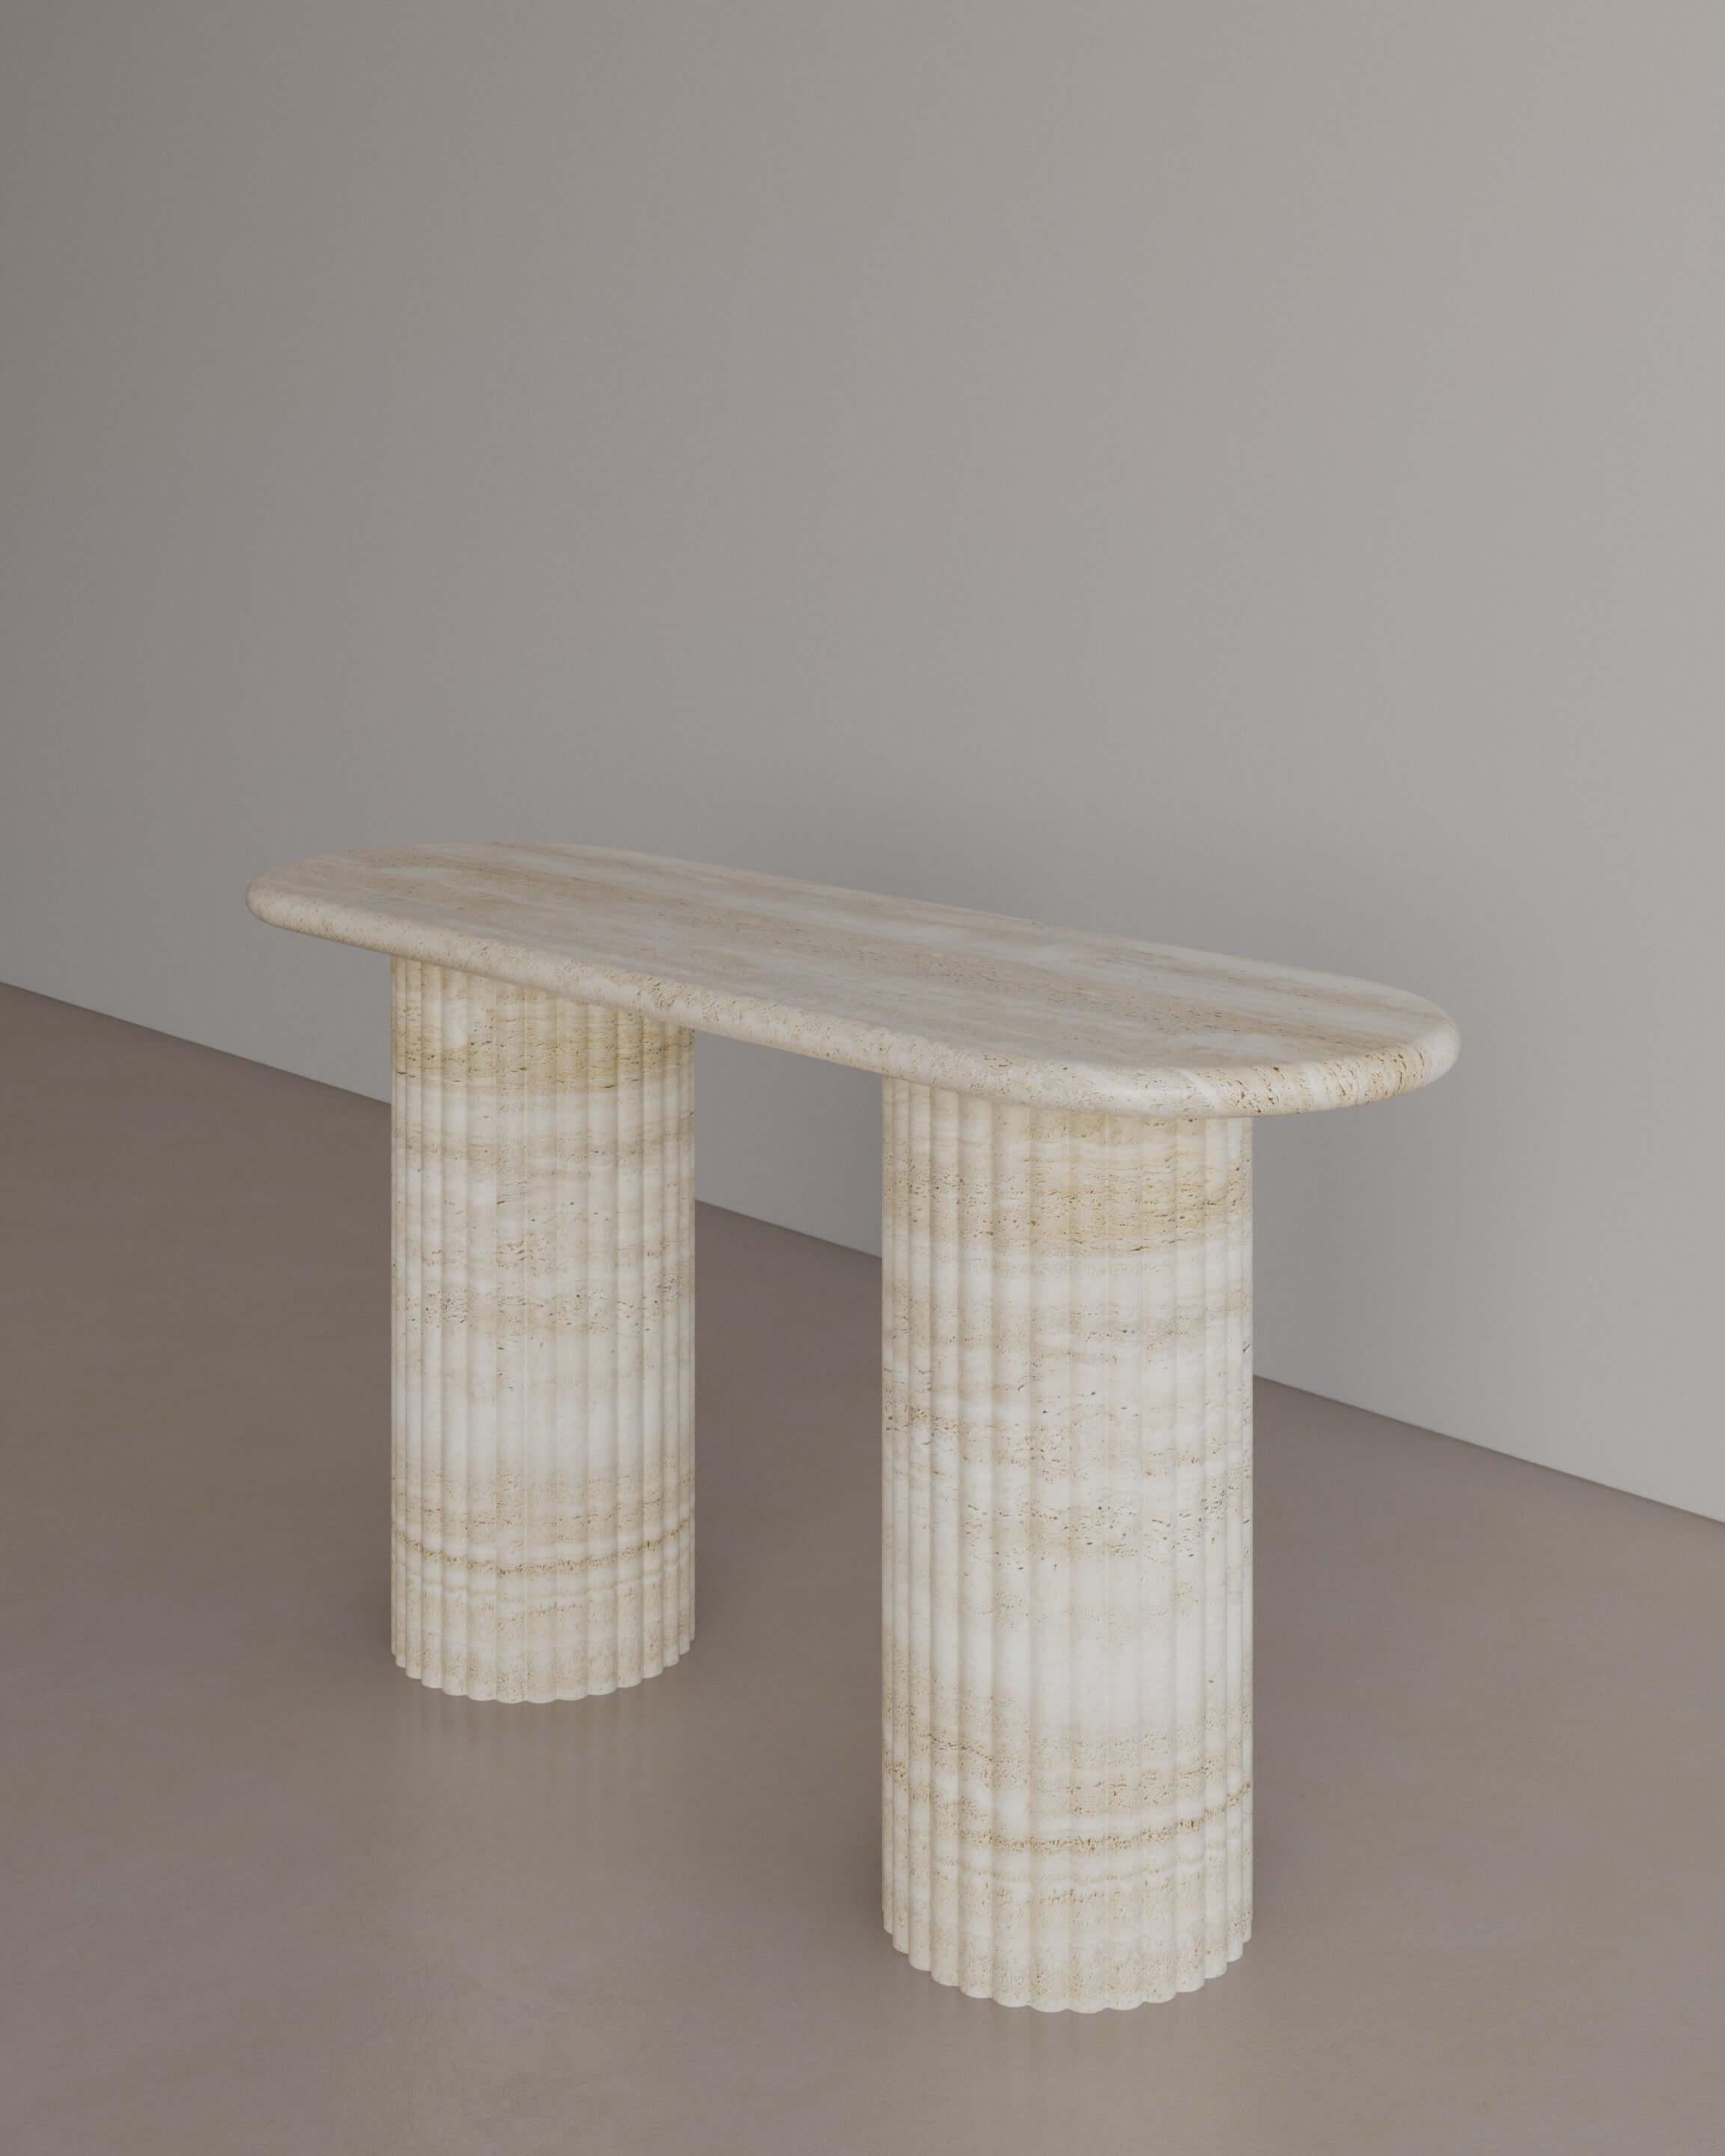 The Essentialist presents The Antica Console table in Nude Travertine. Featuring two Roman-style pillars, used throughout the Empire’s history to celebrate conquest and victory. Featuring a sensuous, elongated oval top with bullnose edges resting on